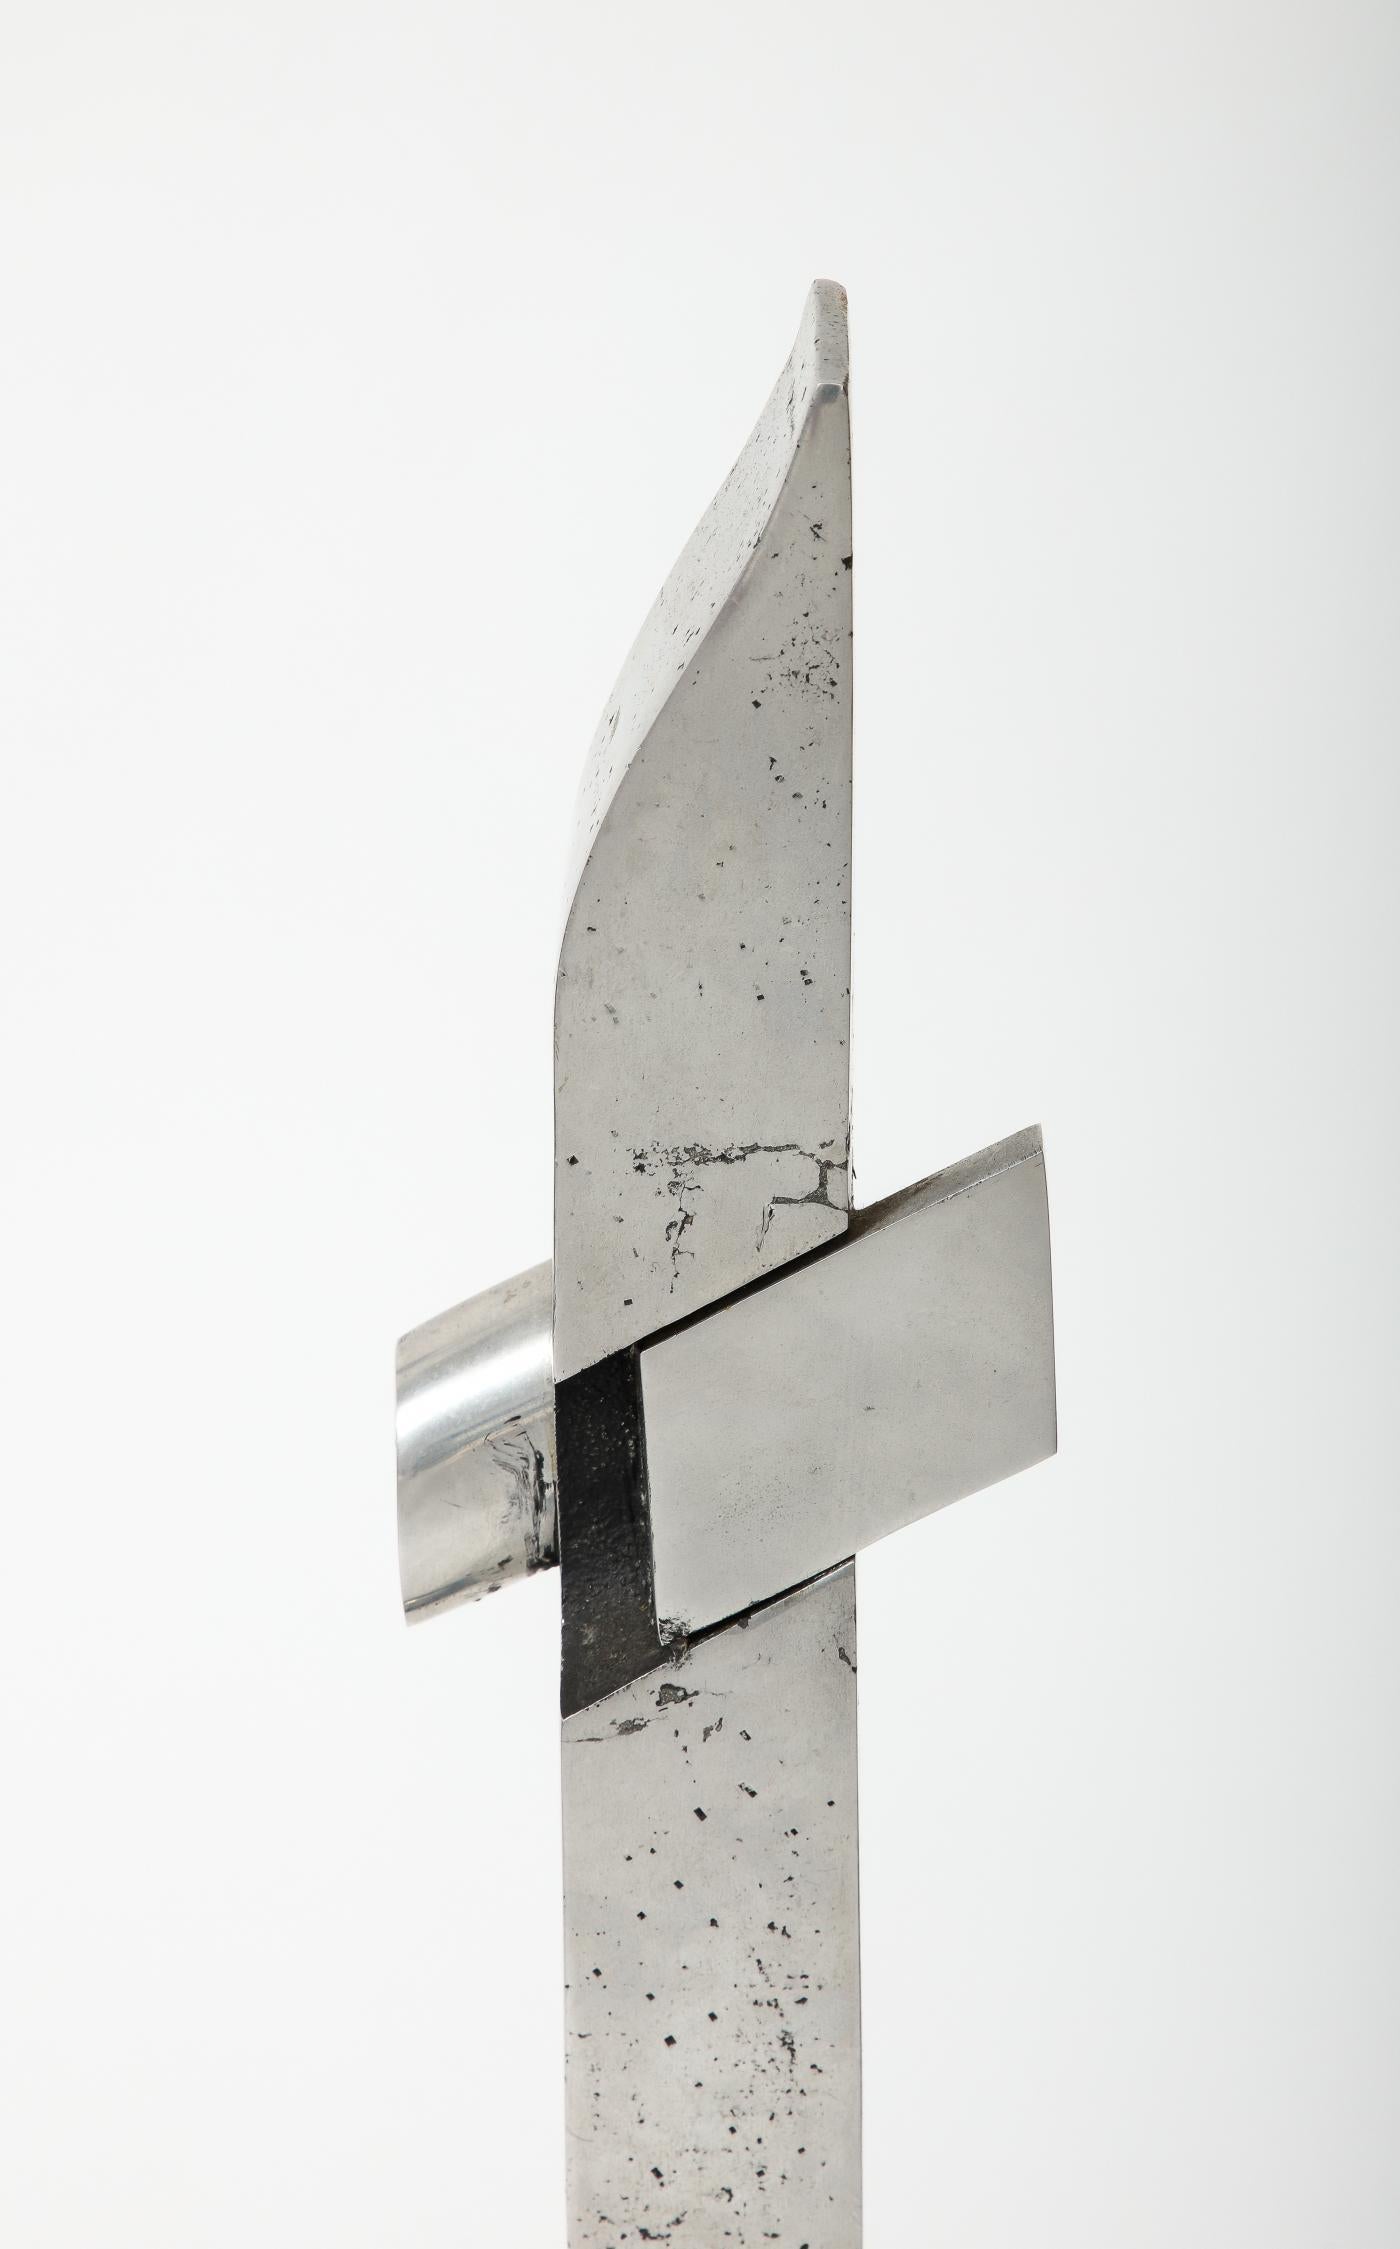 Abstract Chromed Steel Sculpture by Thibaud Weisz, c. 1950 For Sale 2